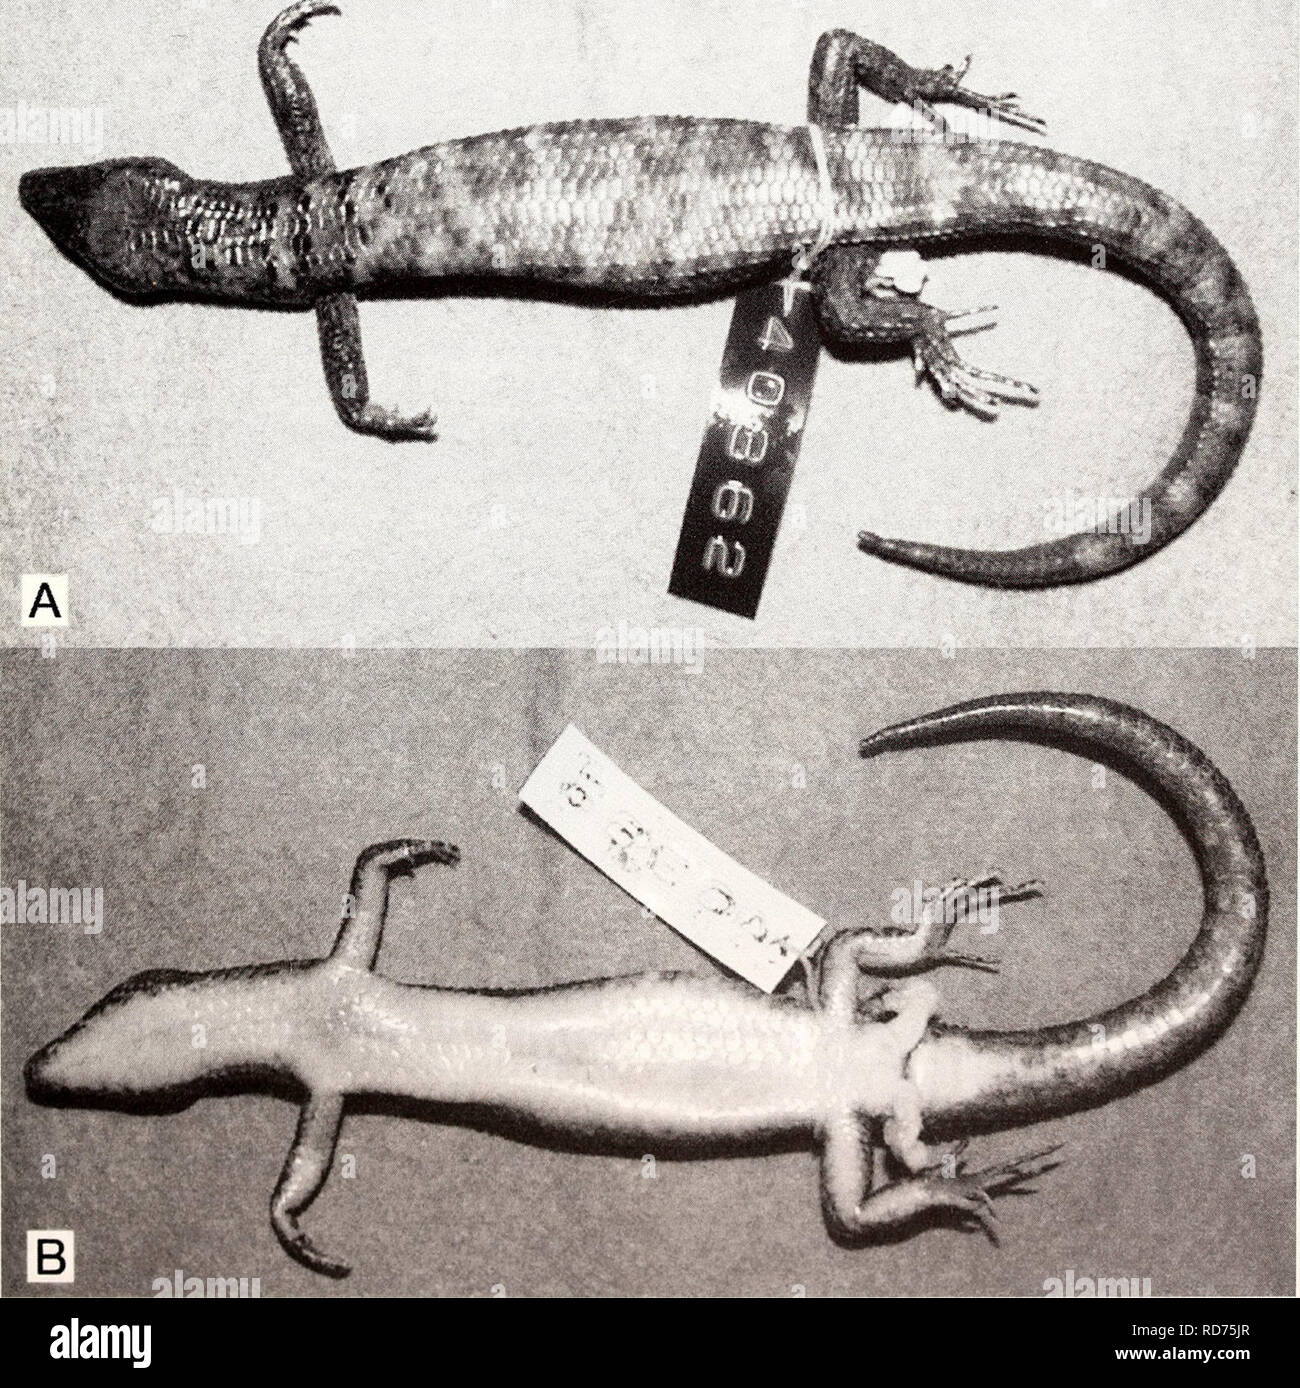 . Current herpetology. Reptiles; Herpetology. HIKIDA ET AL.—NEW DEPRESSED-BODIED TROPIDOPHORUS 11 the parietals or the interparietal (whichever was more distant). Snout length was mea- sured from the tip of the snout to the ante- rior margin of the eye. Presacral vertebrae were counted by use of autoradiography (Softex, Softex Co.). Tropidophorus latiscutatus sp. nov. (Figs. 2 and 3) Holotype Adult male, TNHM-R-60001 (KUZ R40362), from Phu Wua Wildlife Sanctuary (18°05'N, 103°45'E, altitude ca 200 m), Nong Kai Province, eastern Thailand, collected by M. Matsui, H. Ota, M. Toda, K. Araya, and J Stock Photo